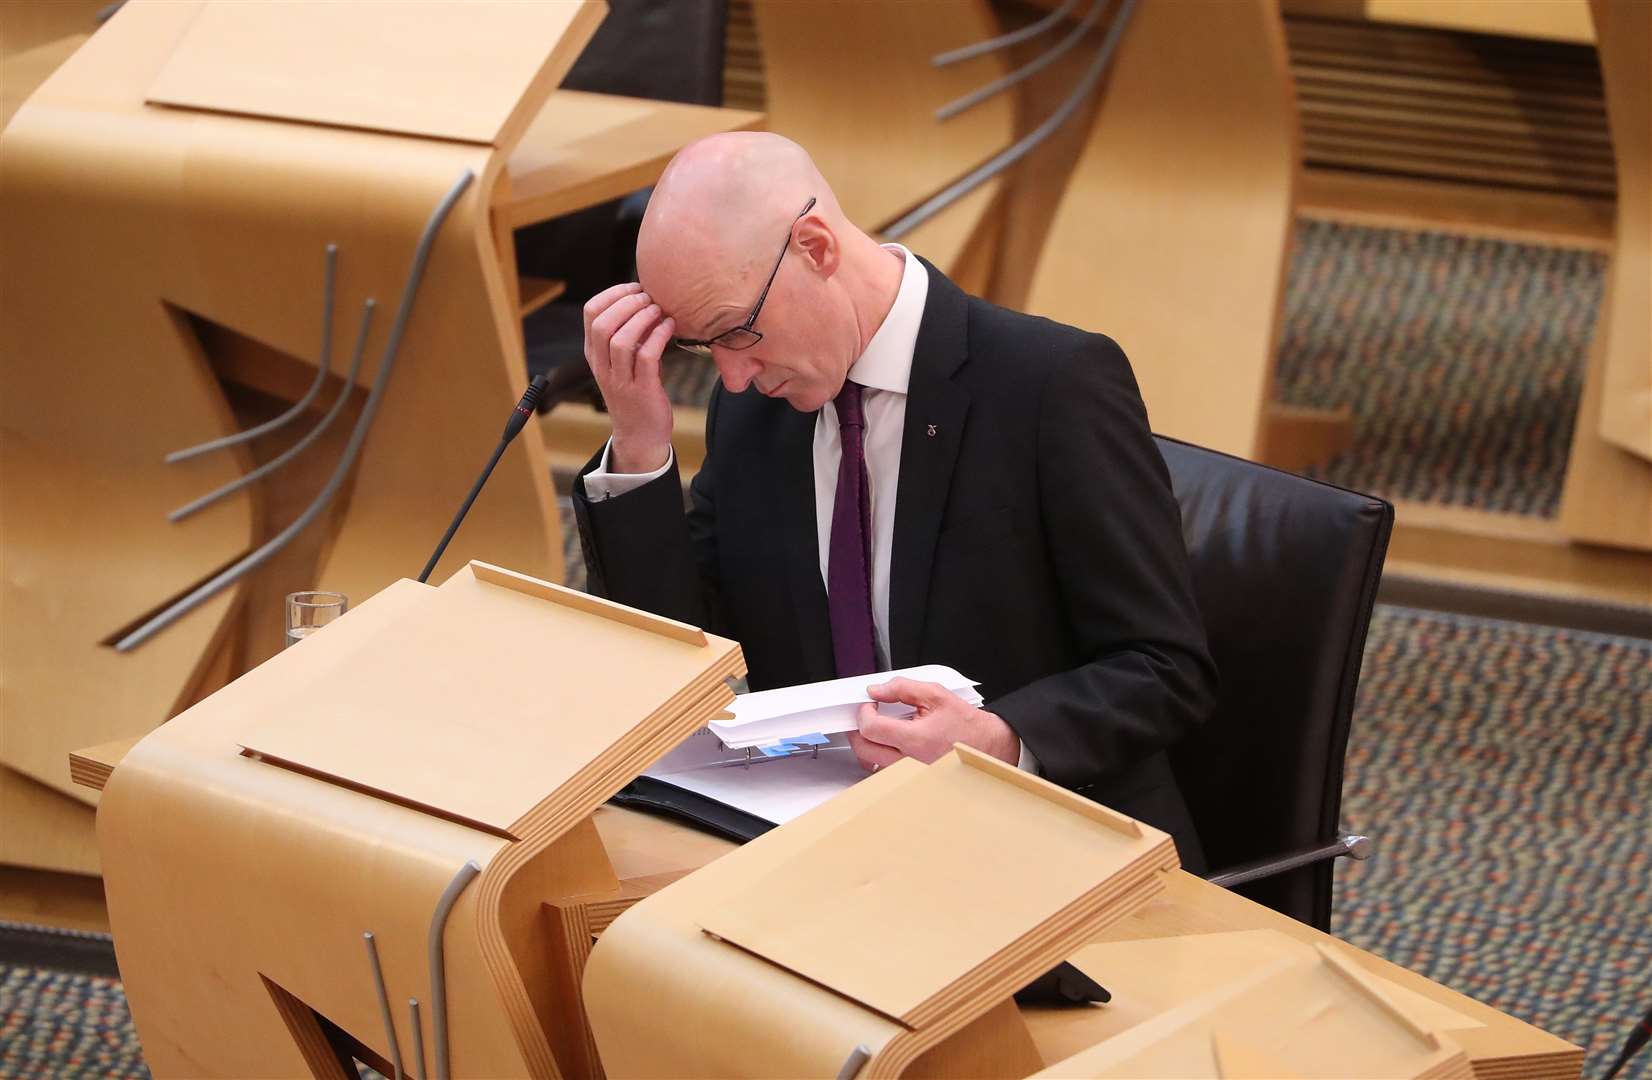 John Swinney wants to find a ‘practical way’ for MSPs to get access to the information (Andrew Milligan/PA)